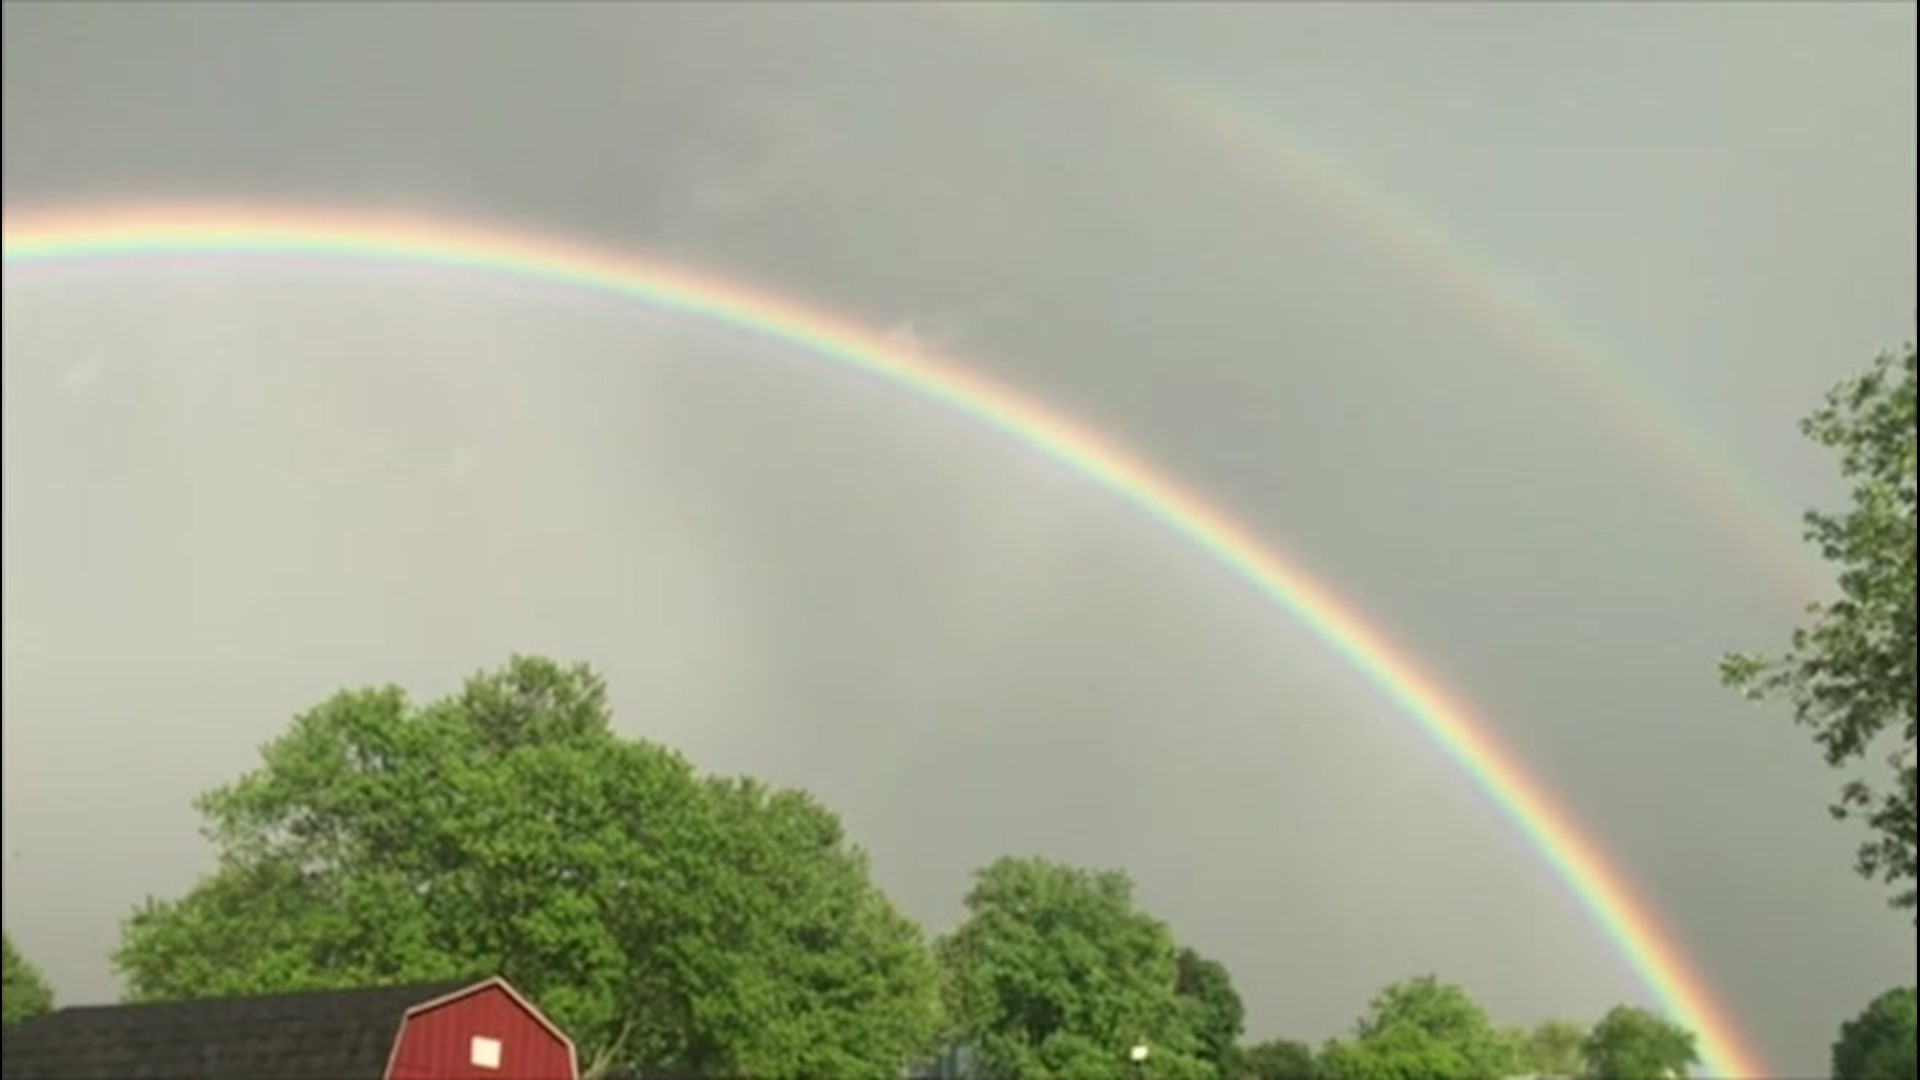 A spectacular rainbow appeared in Houserville, Pennslyvania, on May 28, minutes after heavy rain ceased from a strong thunderstorm.